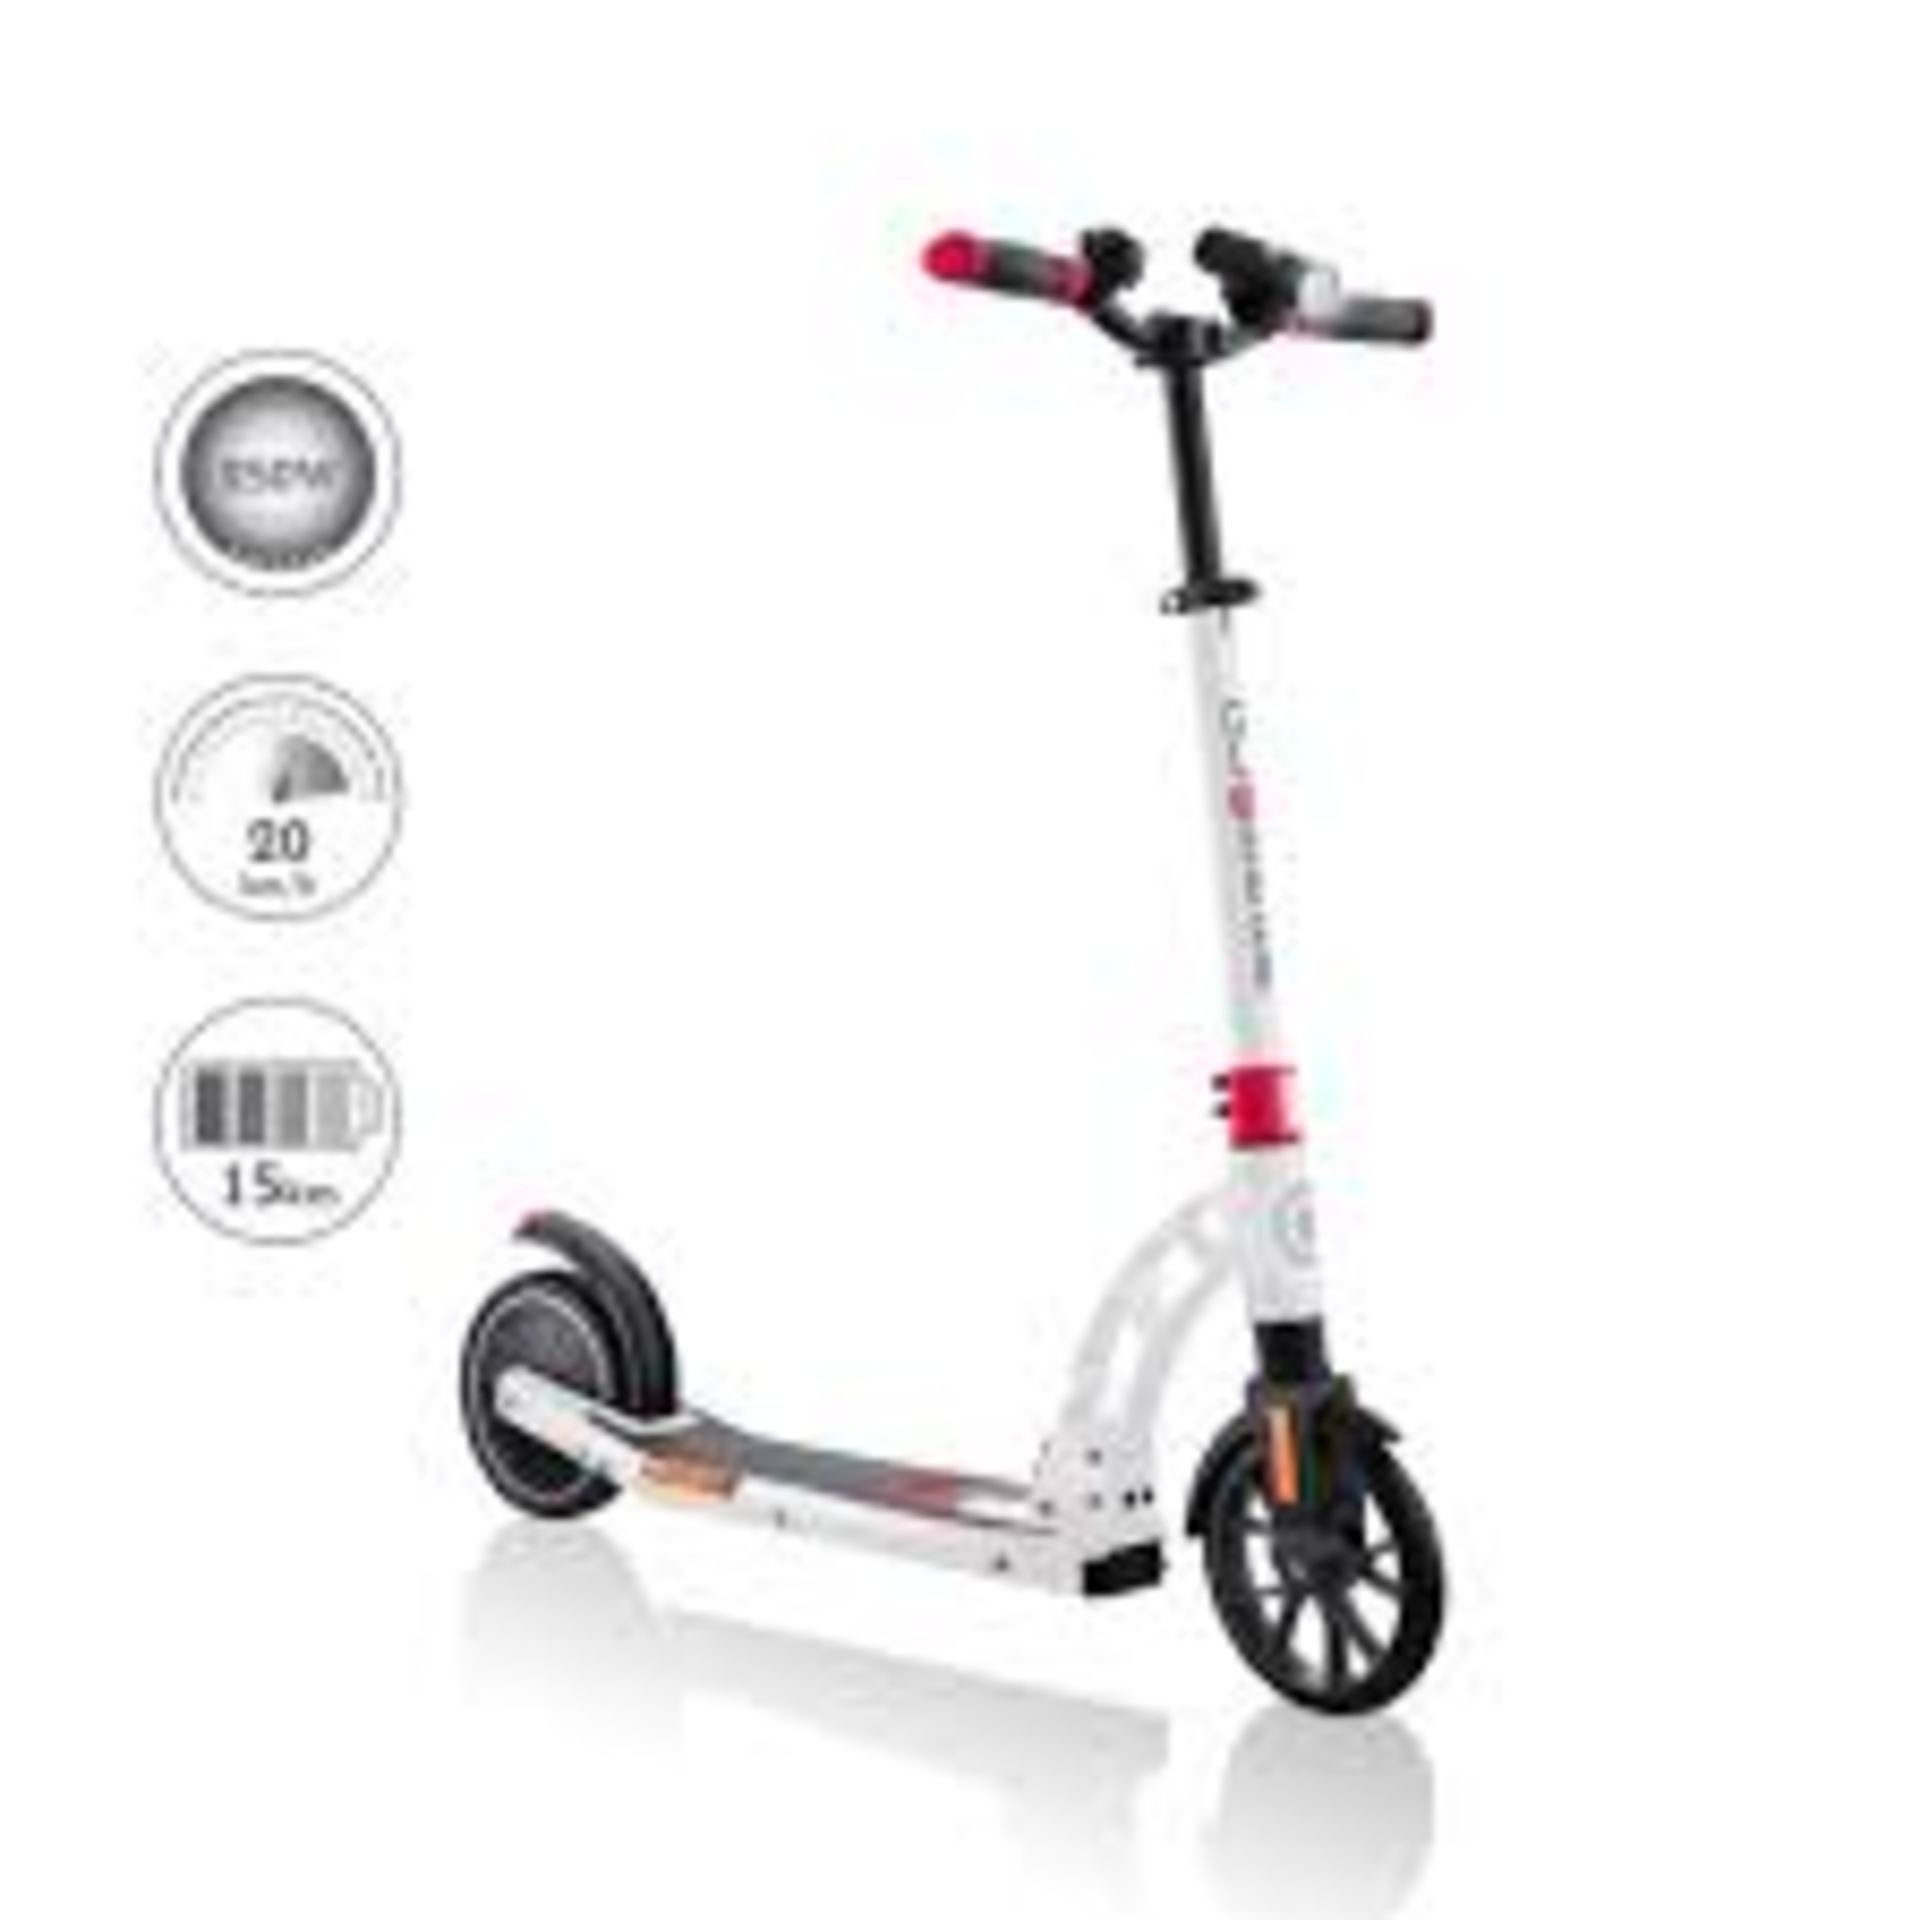 BRAND NEW BOXED GLOBBER ONE K E-MOTION 15 V3 - WHITE/RED ELECTRIC SCOOTER. RRP £349.99. ONE K E-